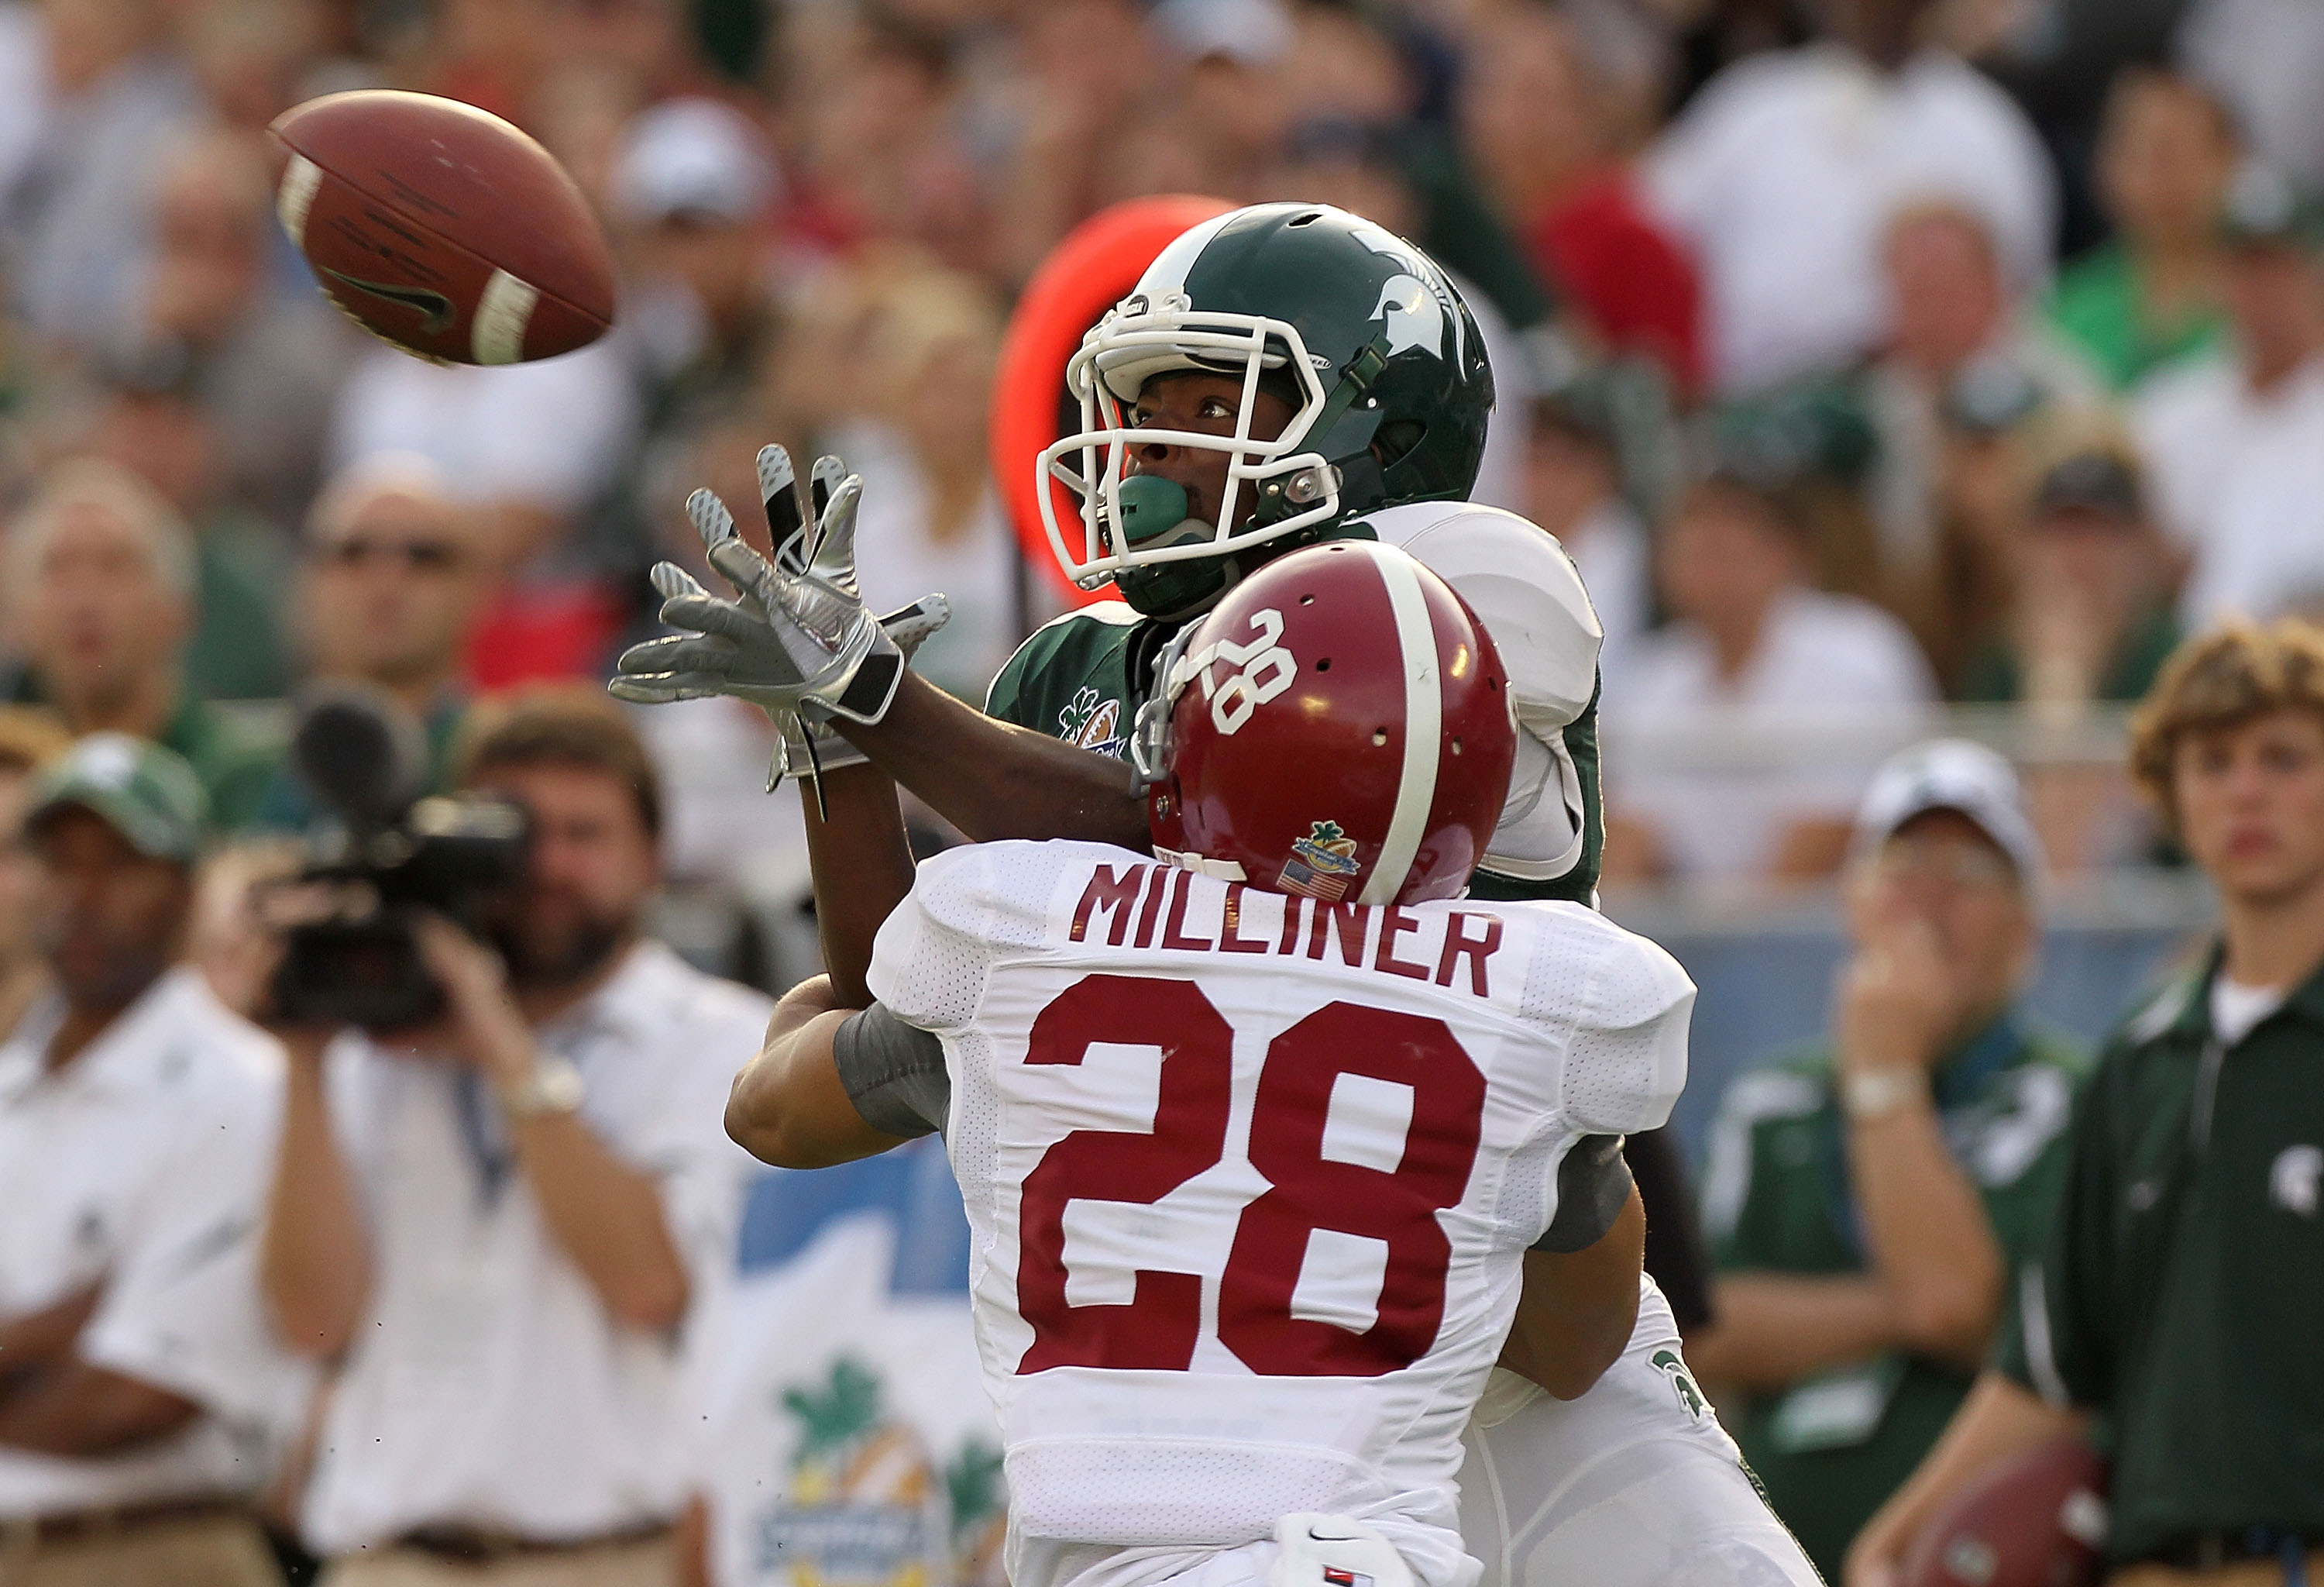 ORLANDO, FL - JANUARY 01:  Keshawn Martin #82 of the Michigan State Spartans has a pass broken up by DeMarcus Milliner #28 of the Alabama Crimson Tide during the Capitol One Bowl at the Florida Citrus Bowl on January 1, 2011 in Orlando, Florida.  (Photo b